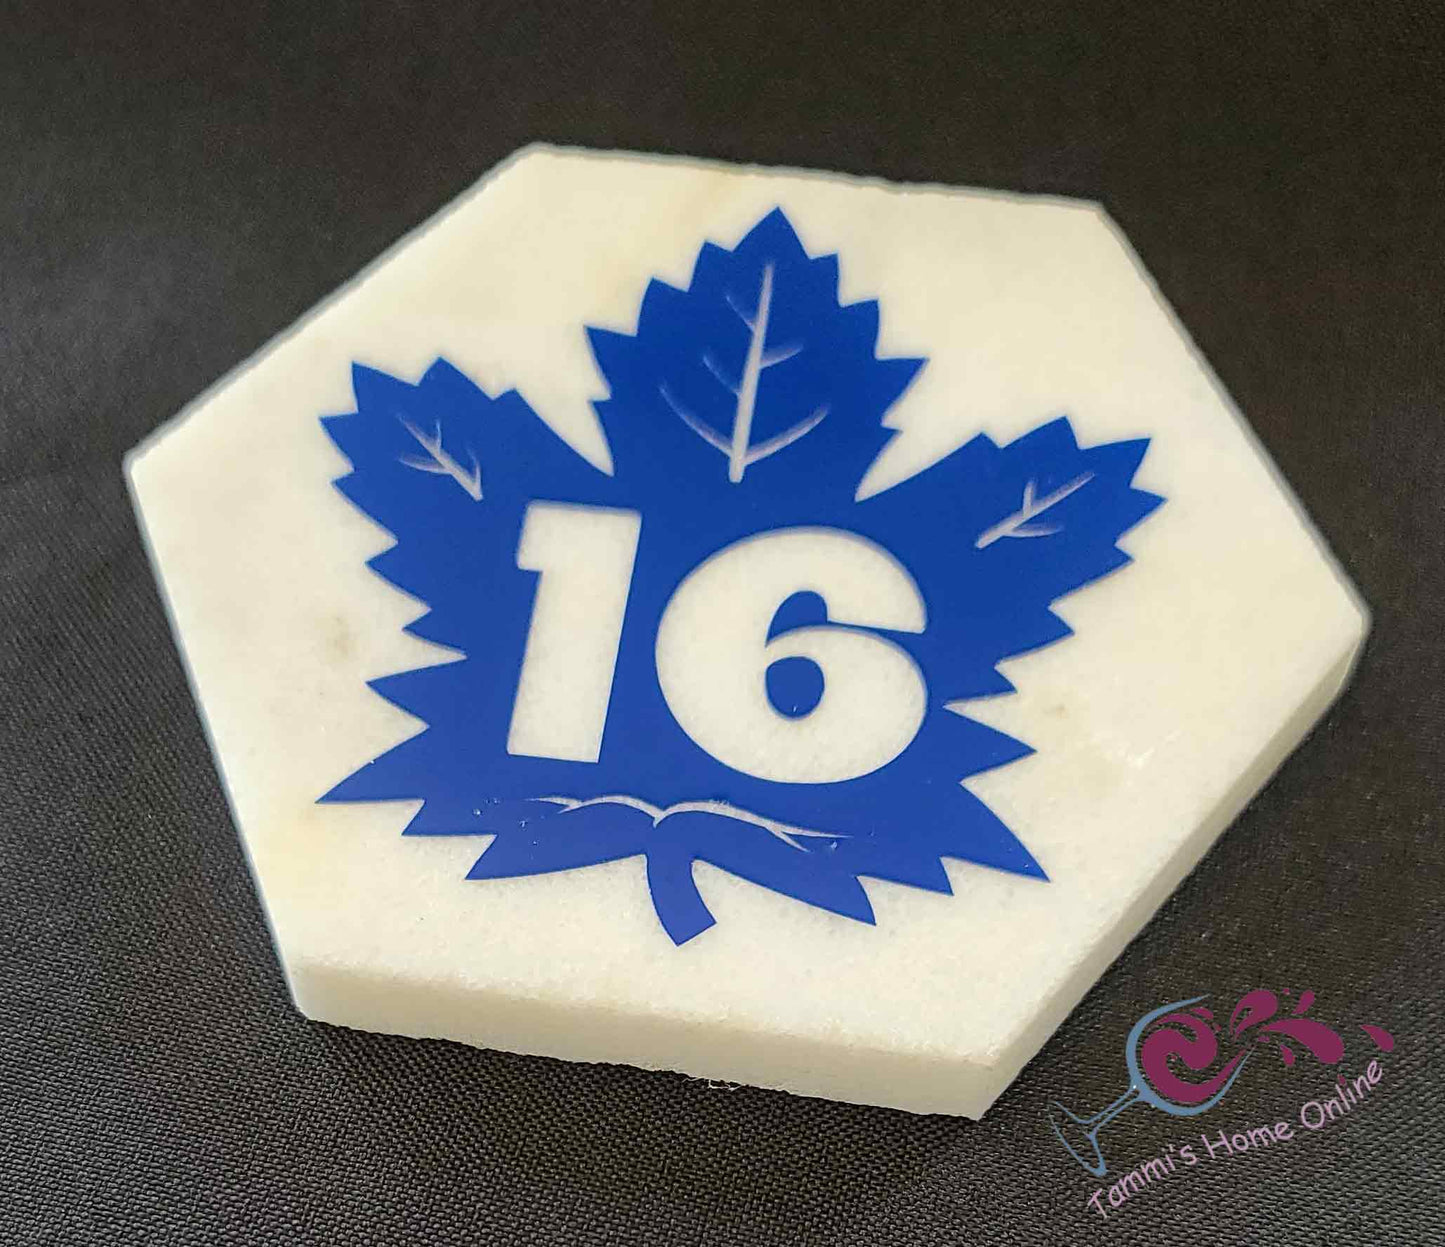 Toronto Maple Leafs #16 - Mitchell Marner - Marble Coaster